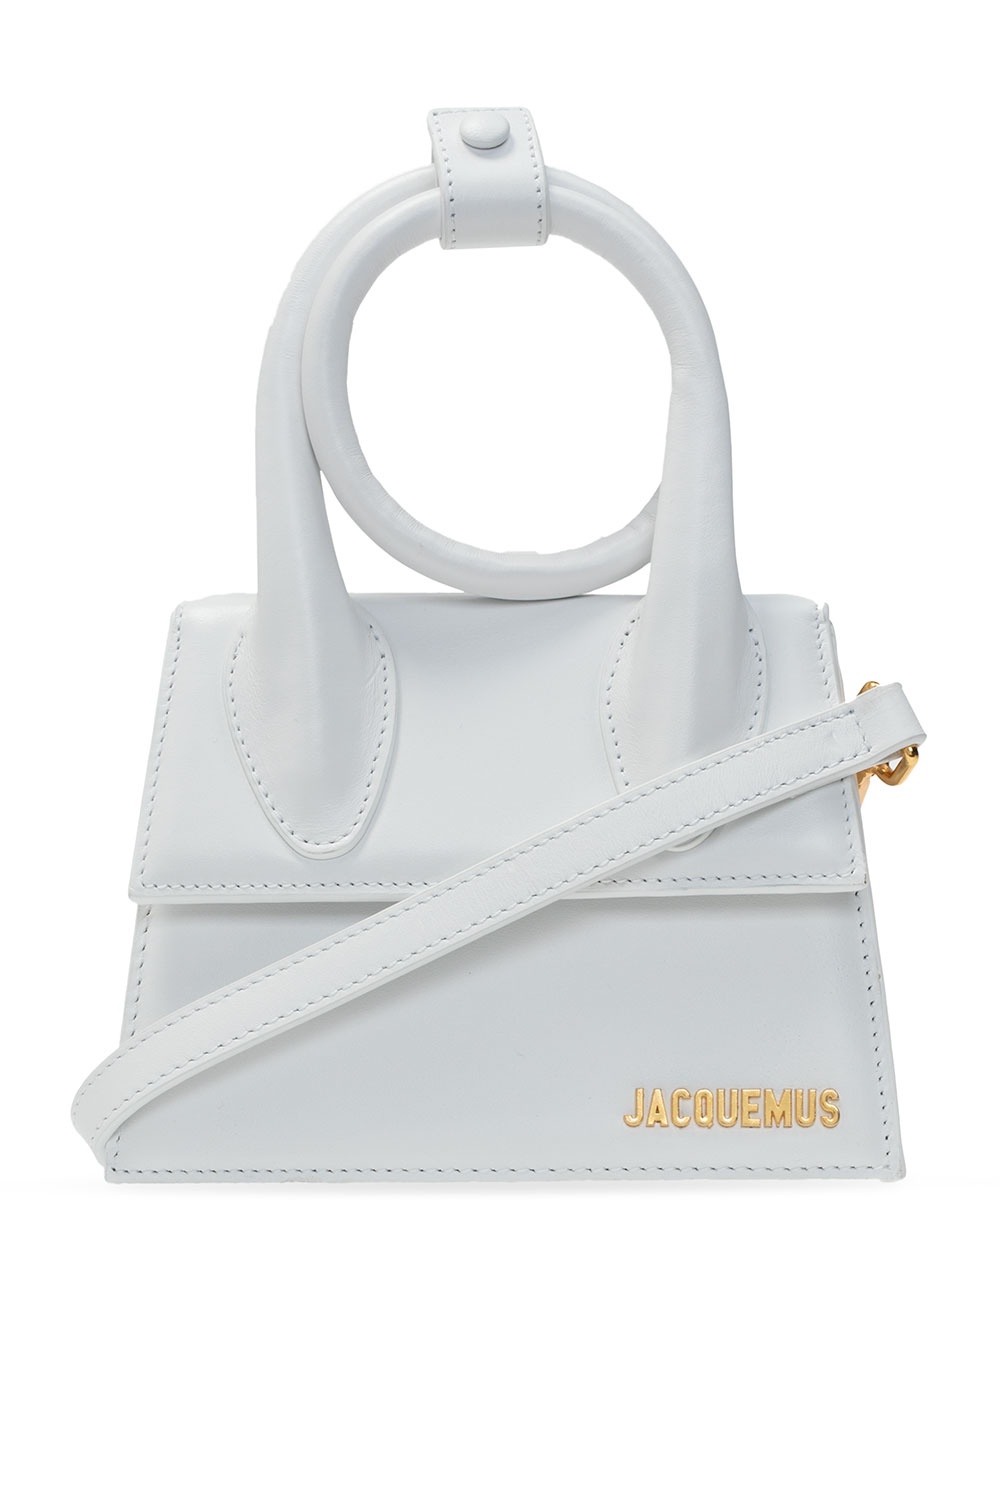 Ego x Molly-Mae cross-body bag in white quilt with chain handle